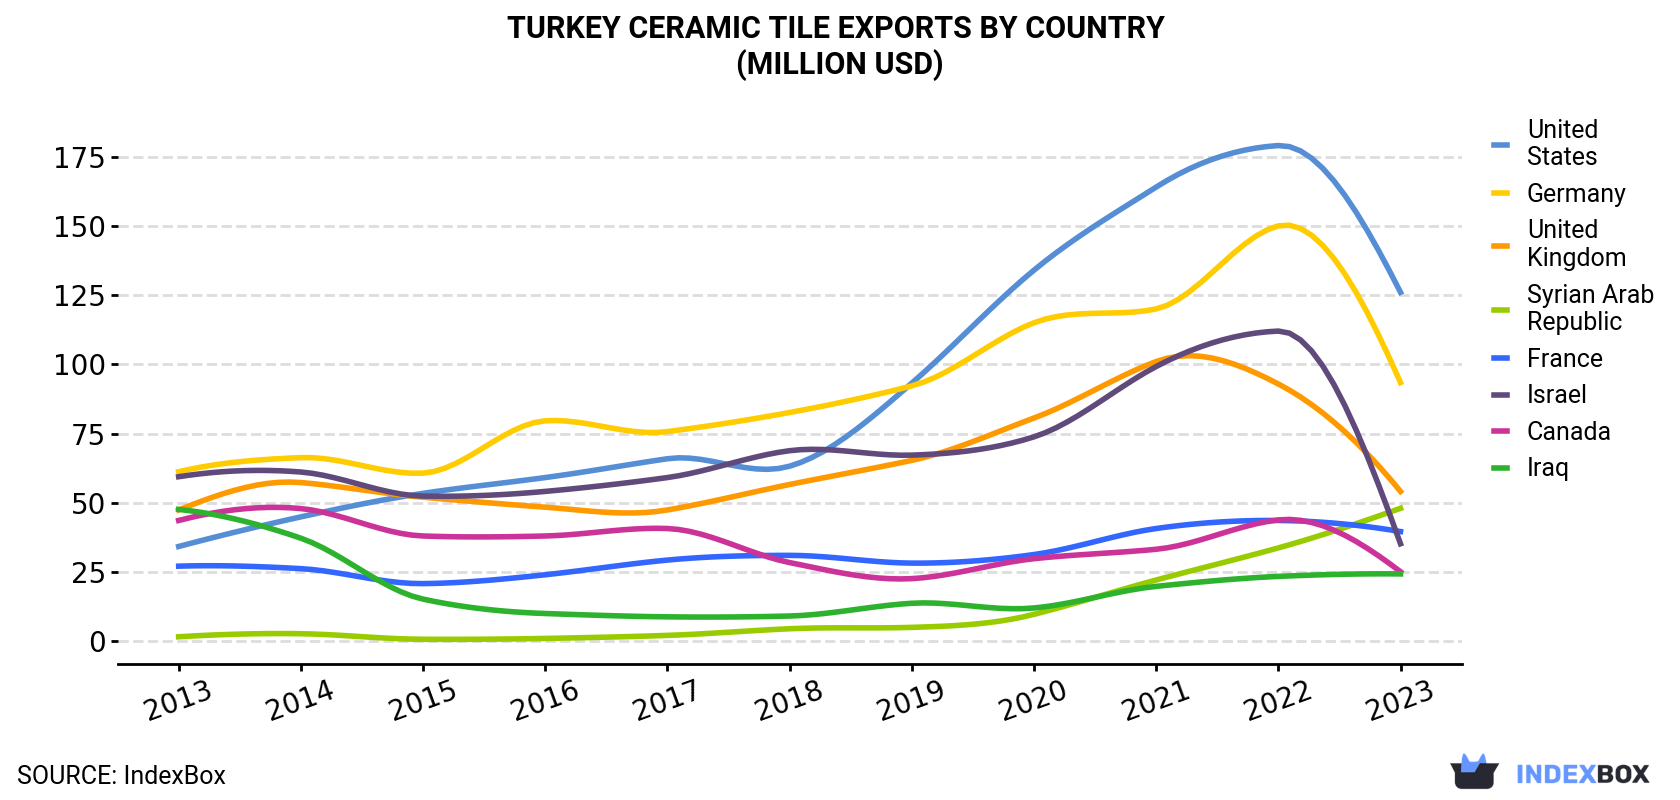 Turkey Ceramic Tile Exports By Country (Million USD)